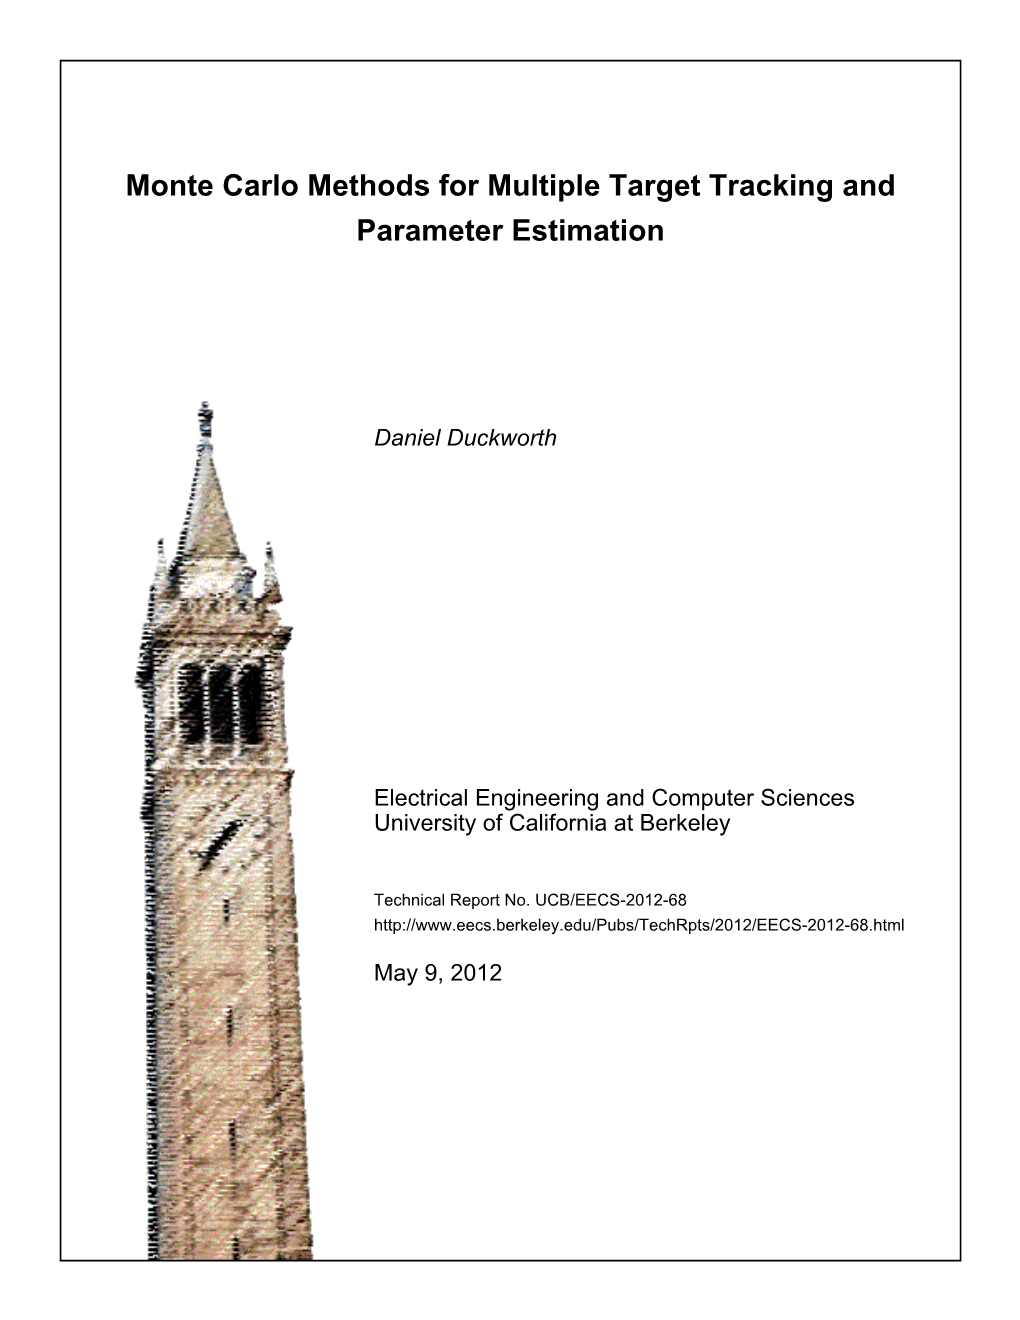 Monte Carlo Methods for Multiple Target Tracking and Parameter Estimation